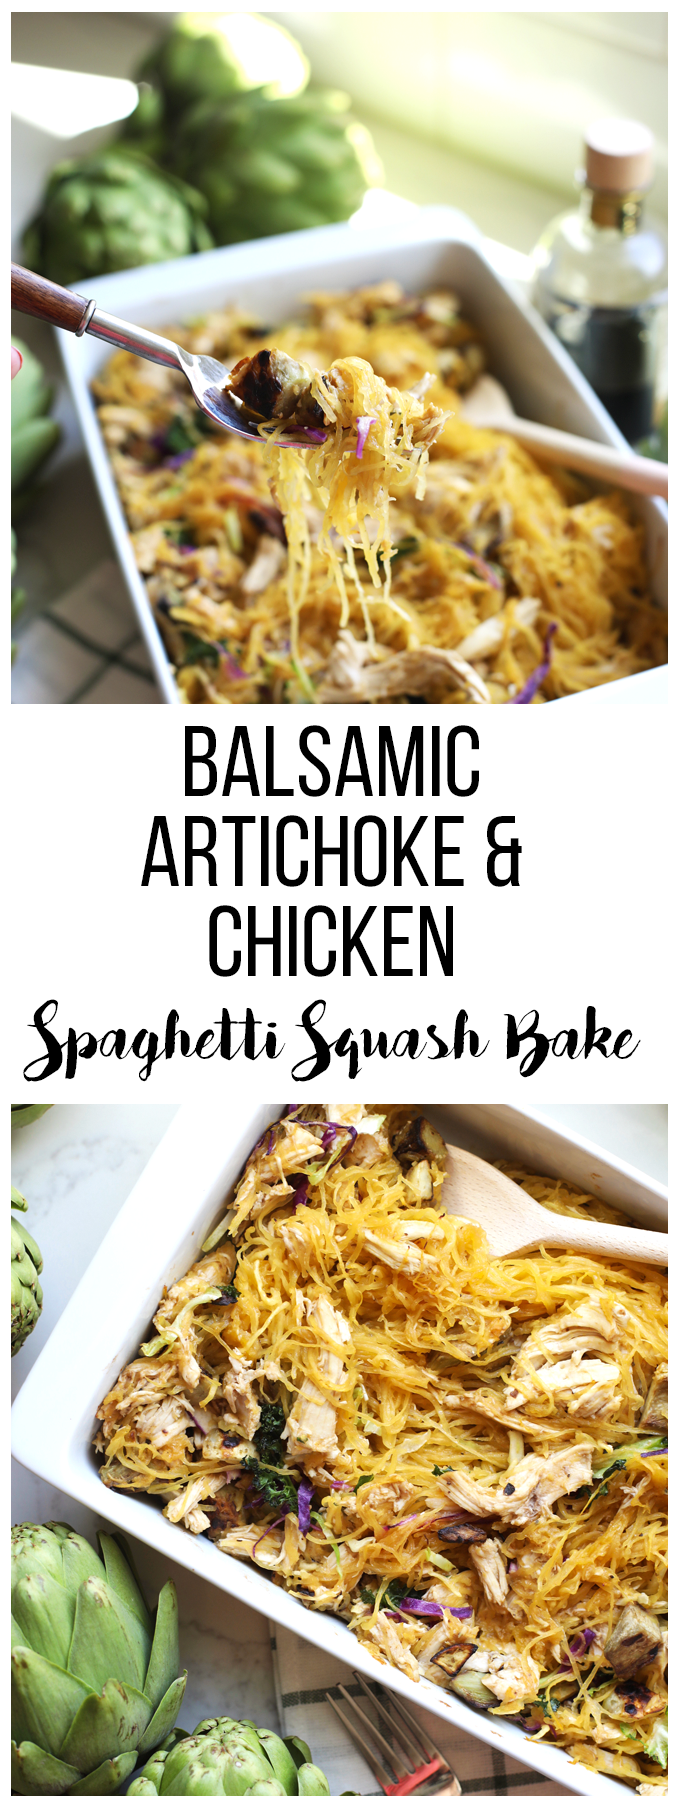 This Balsamic Artichoke & Chicken Spaghetti Squash Bake recipe is so simple to throw together, whole30 compliant and delicious!